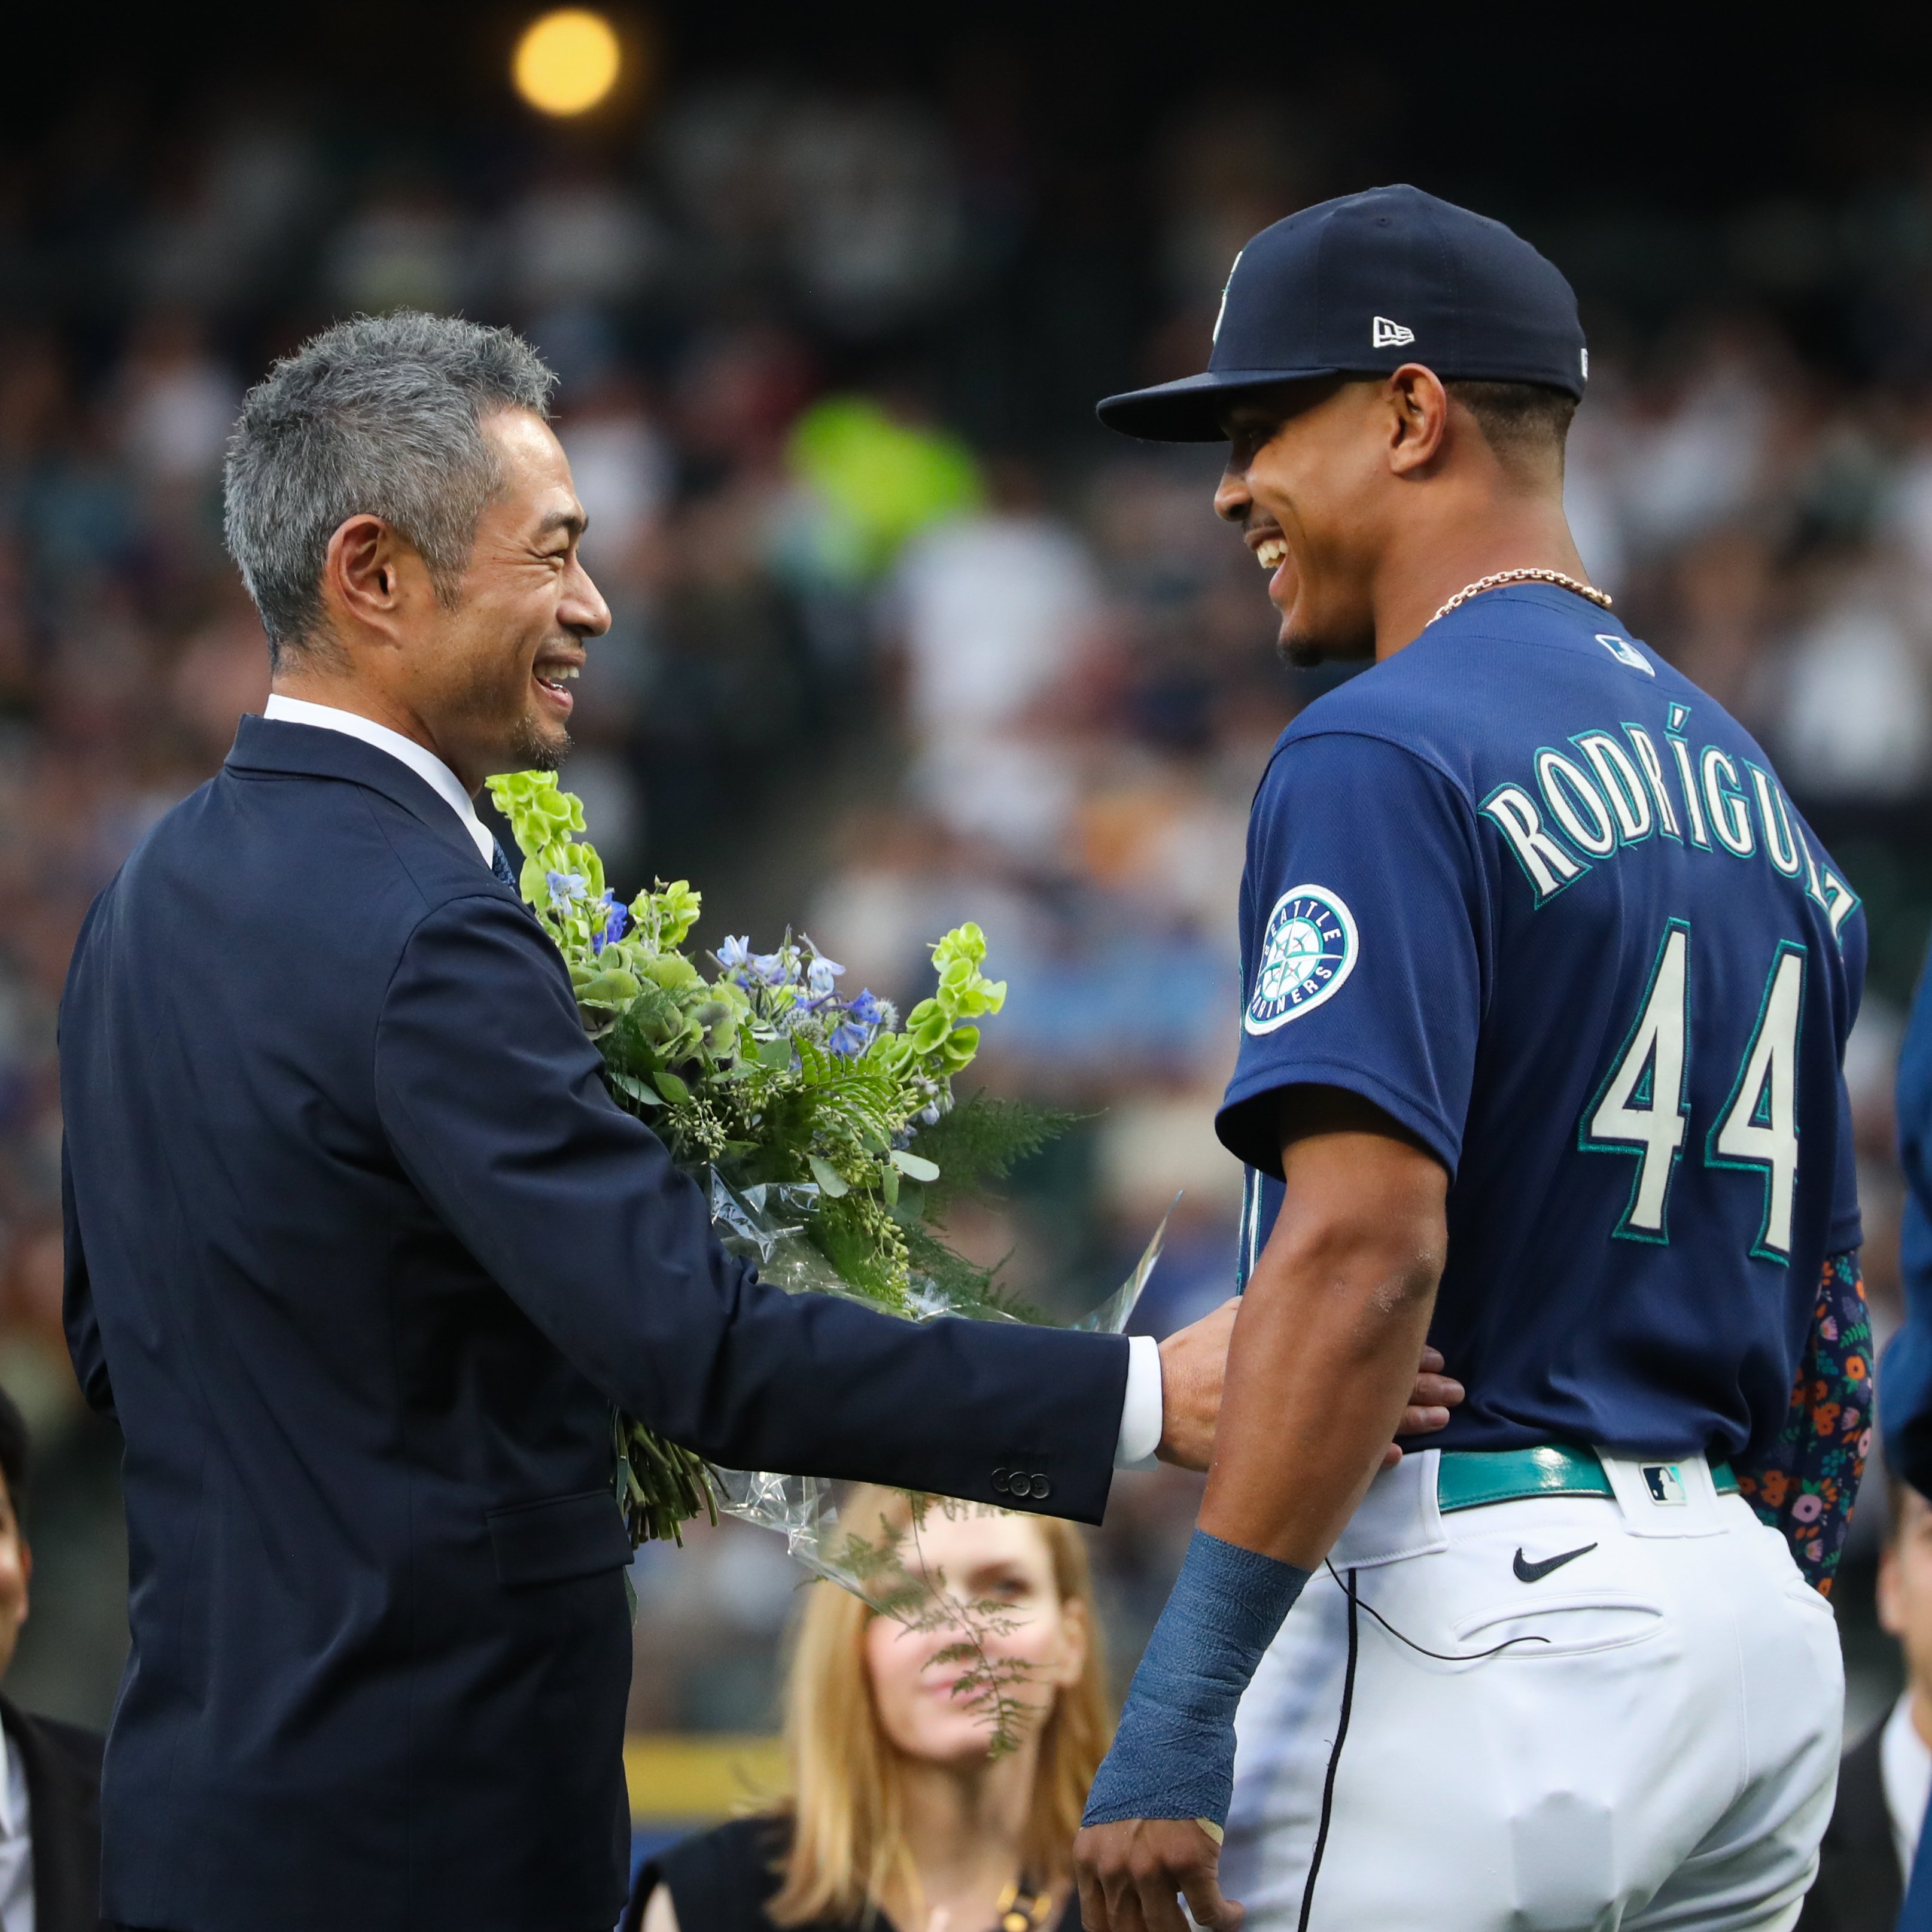 Former Seattle Mariners player Ichiro Suzuki, left, is presented with a  bouquet of flowers by Mariners' Julio Rodriguez as he is inducted into the Mariners  Hall of Fame during a ceremony before